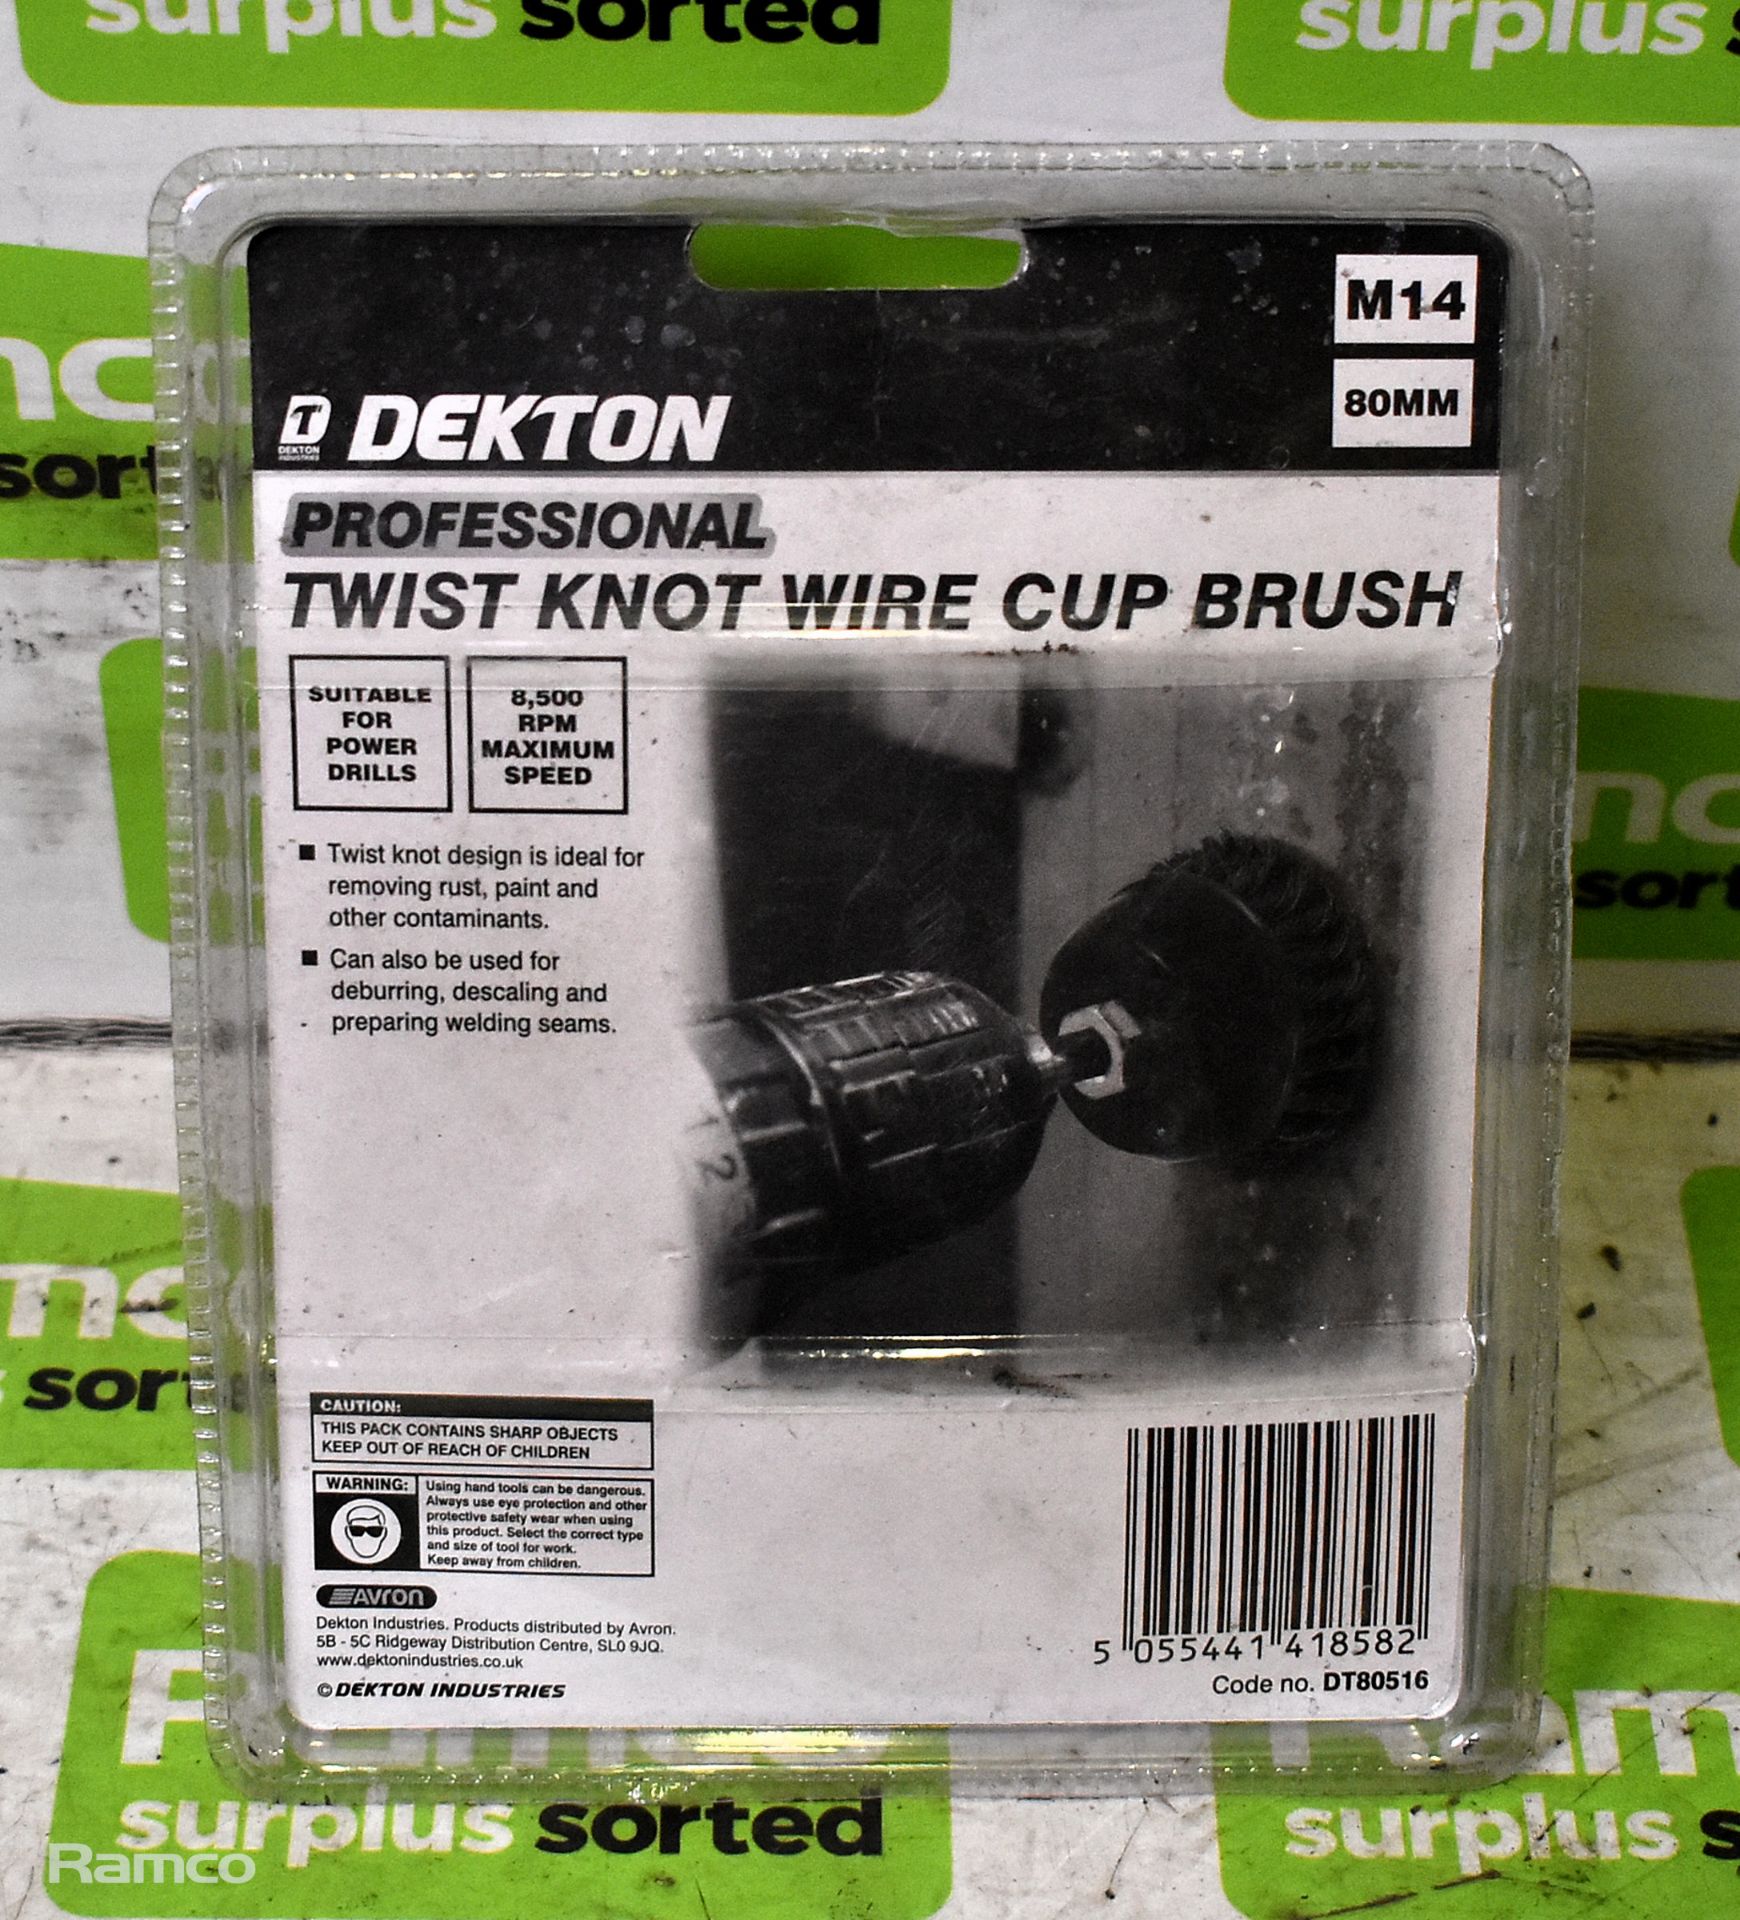 6x Dekton 80mm M14 twist knot wire cup brushes, 5x packs of Neilson steel ultra cutting discs - Image 4 of 12